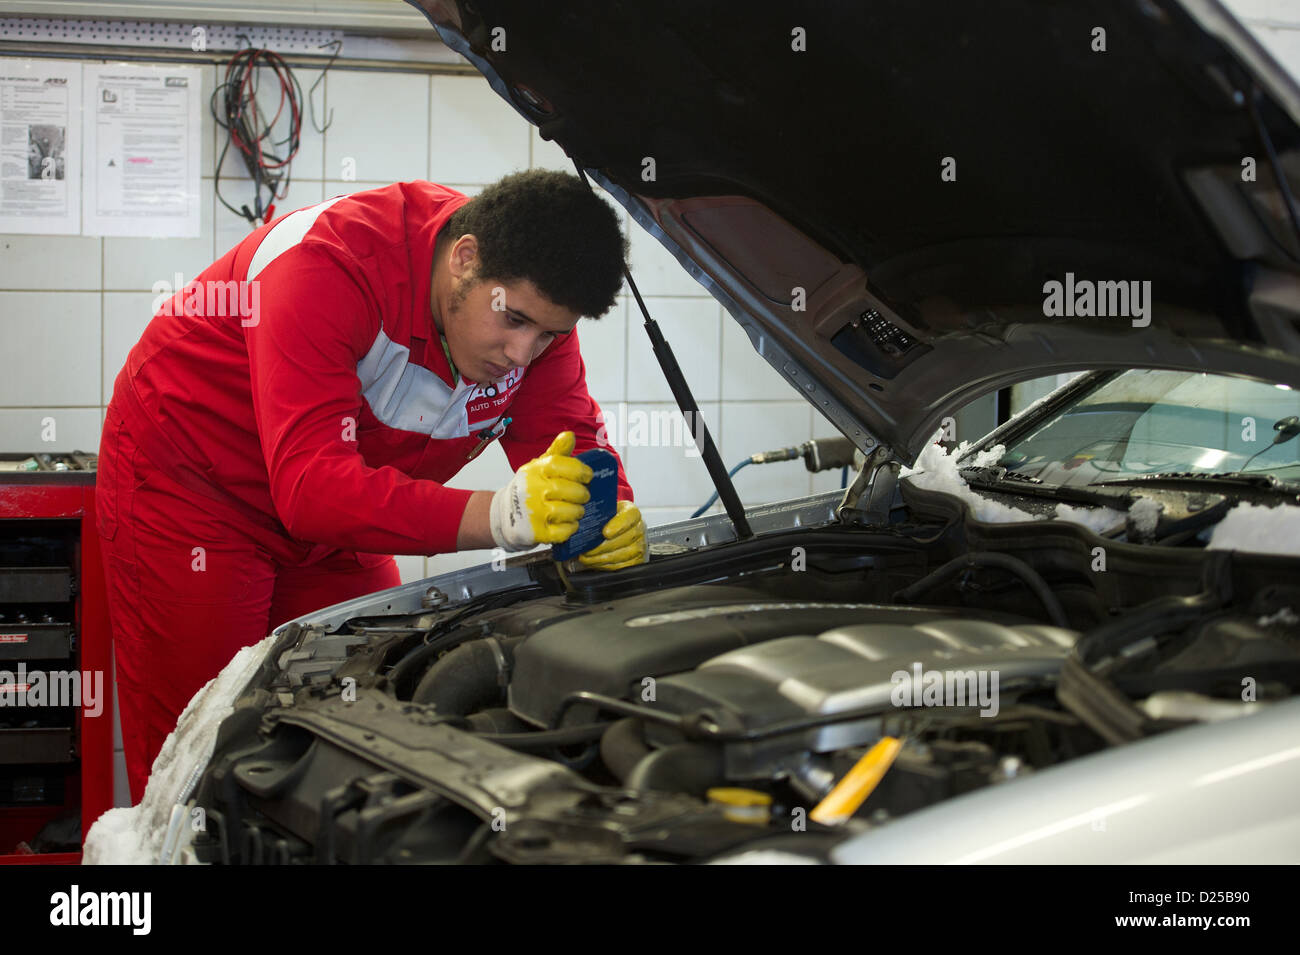 Djamil (15 years old), participant of the school pilot project 'Productive Learning,' checks a vehicle's antifreeze content as part of his internship at a mechanic's garage in Dresden, Germany, 14 January 2013. The project for pupils who are in danger of not finishing high school, is being offered permanently in Saxony, according to Saxony's Culture Minister Kurth on Monday. At the moment around 200 pupils in the 8th and 9th year spend two days a week doing an internship of their own choosing. Photo: Arno Burgi Stock Photo